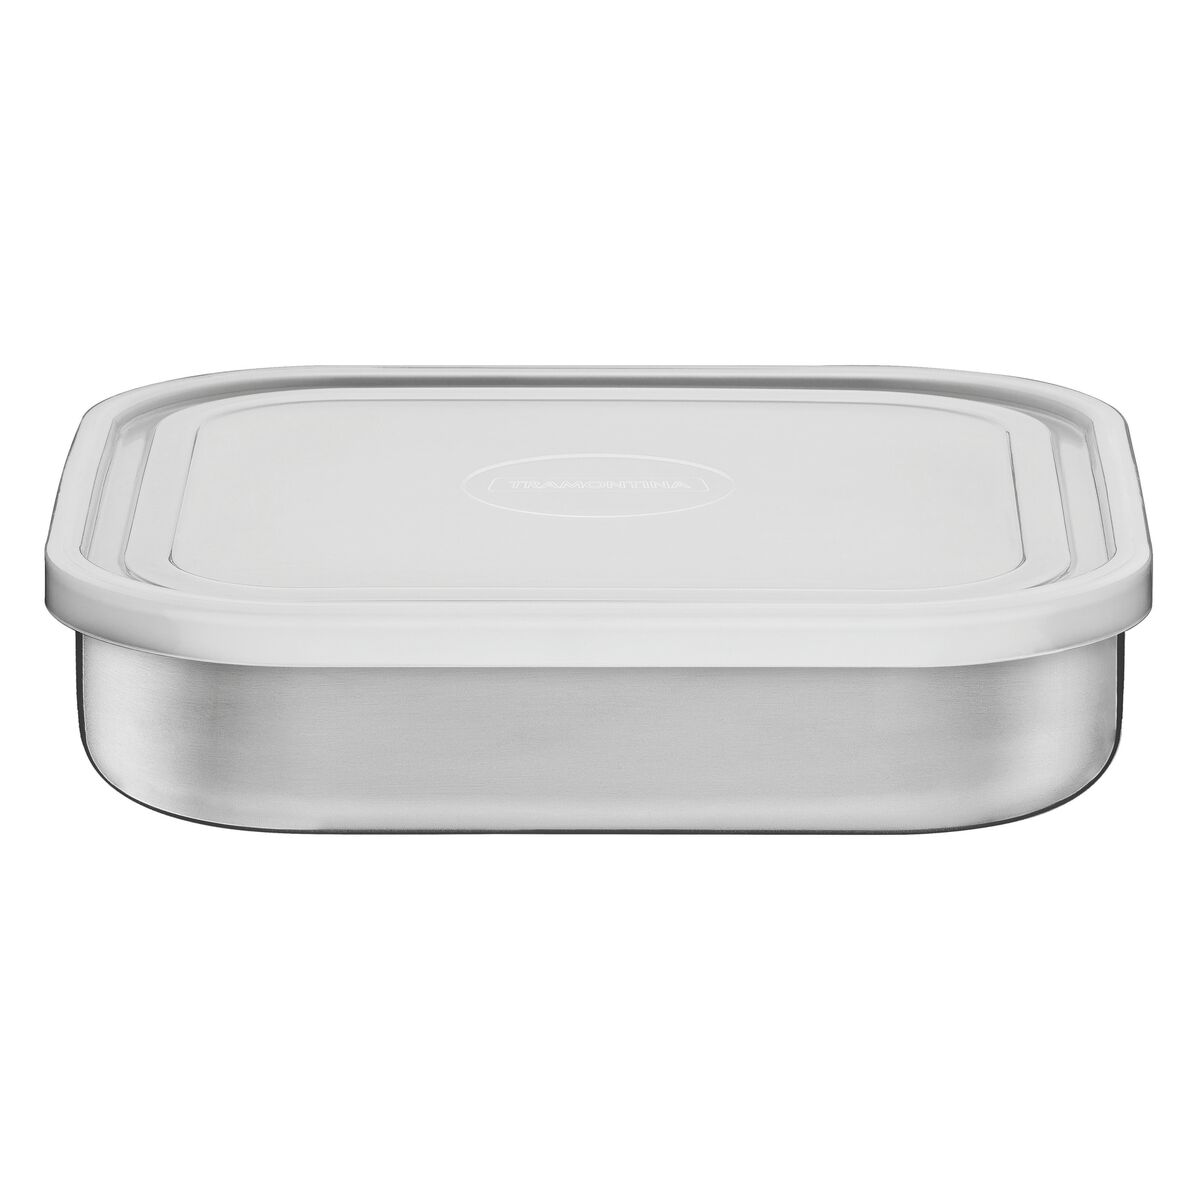 Tramontina Freezinox square stainless steel container with plastic lid, 16 cm and 0.8 L